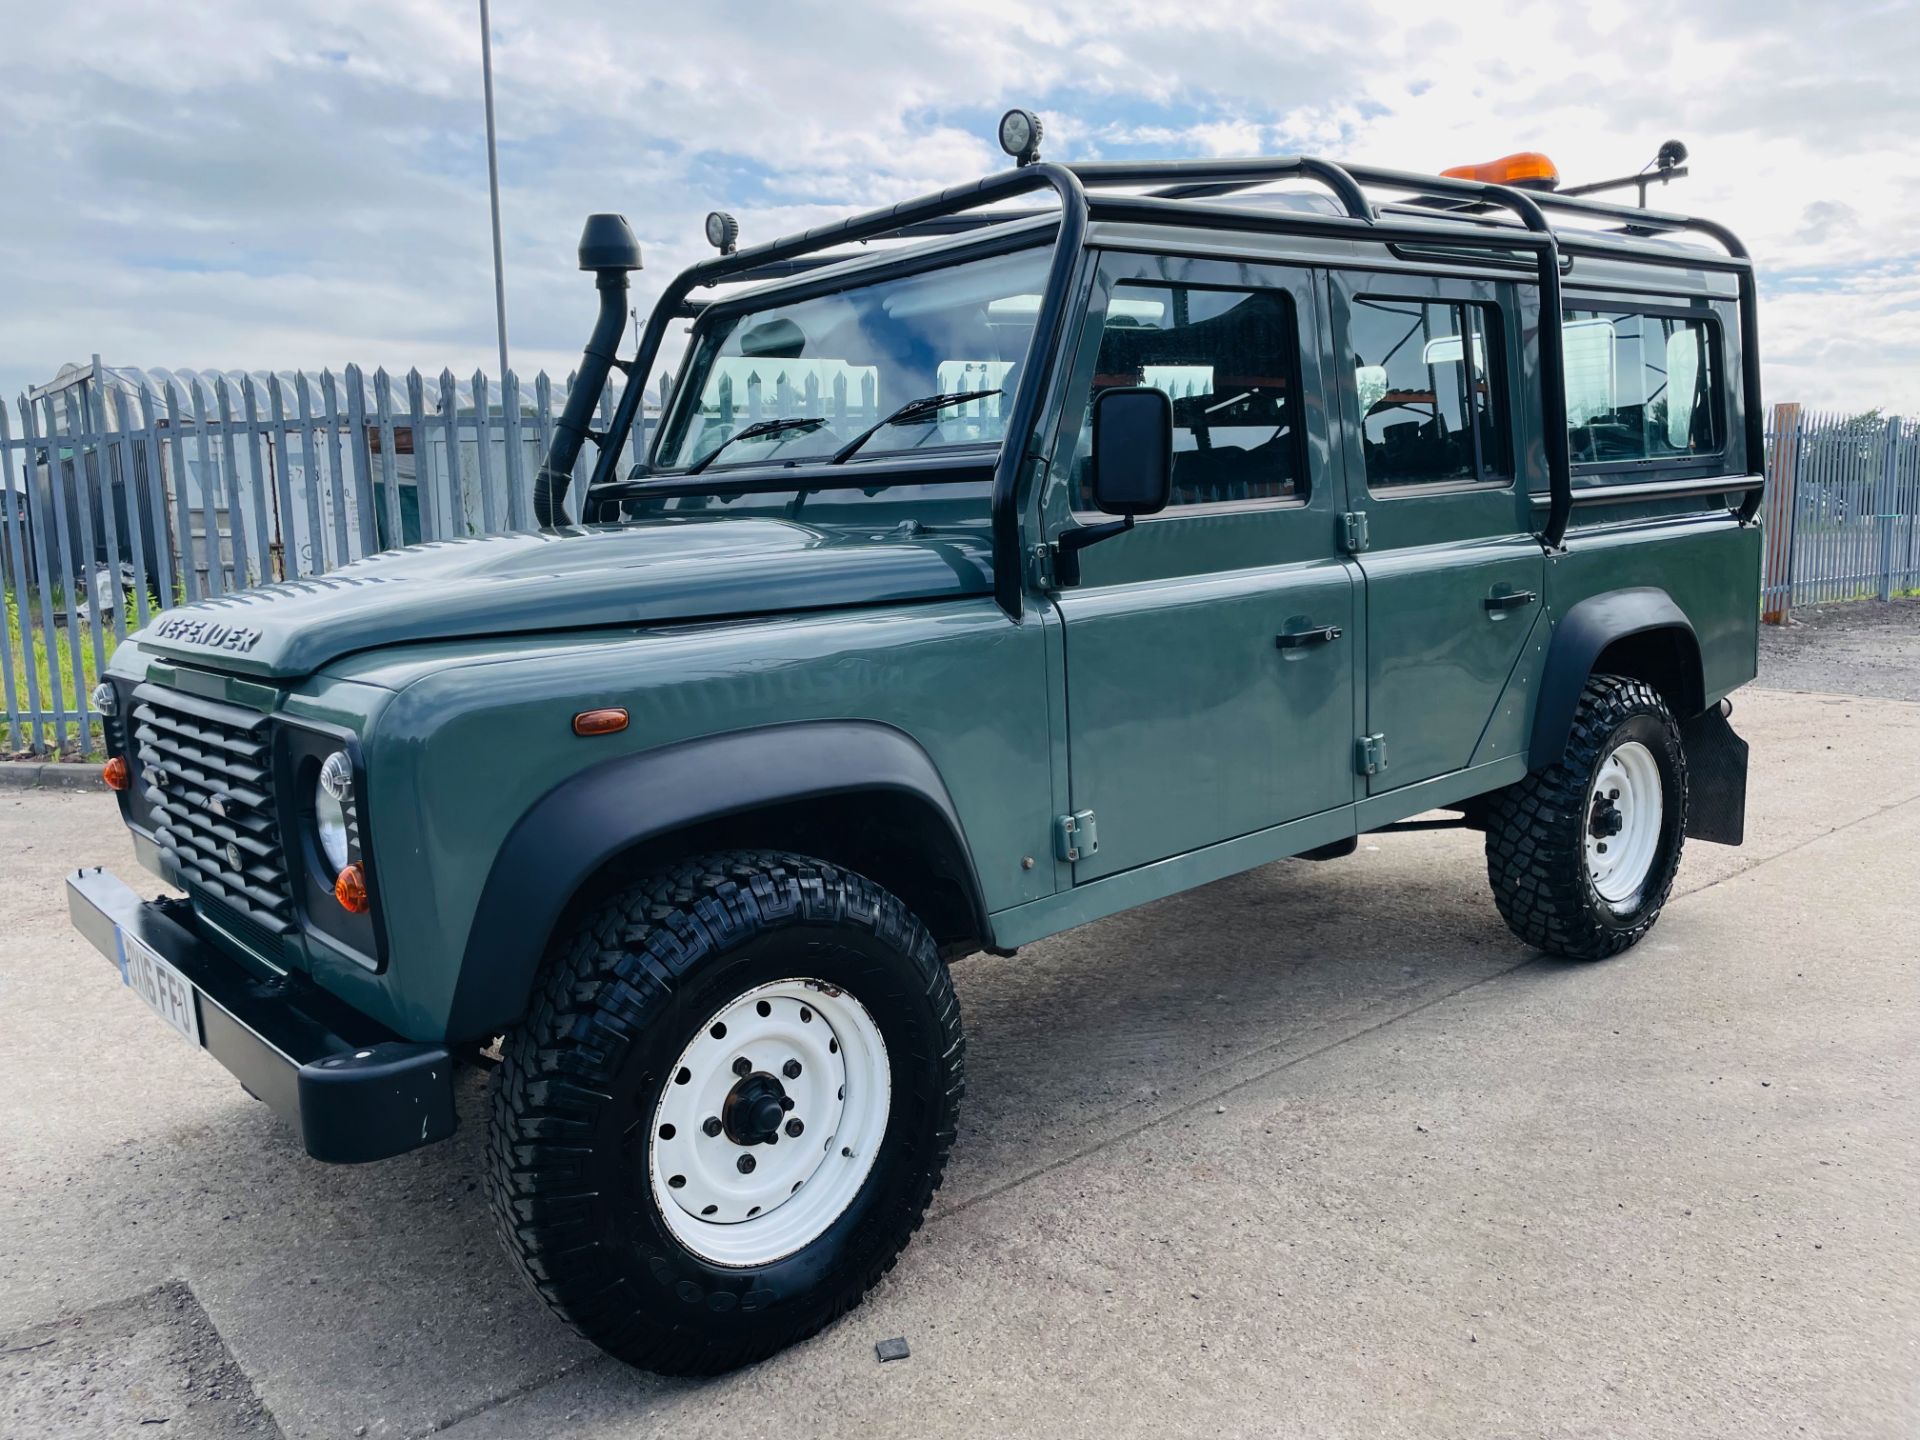 (Reserve Met) LAND ROVER DEFENDER 110 2.2TDCI COUNTY STATION WAGON (2016)1 OWNER -25K WITH HISTORY - Image 2 of 20